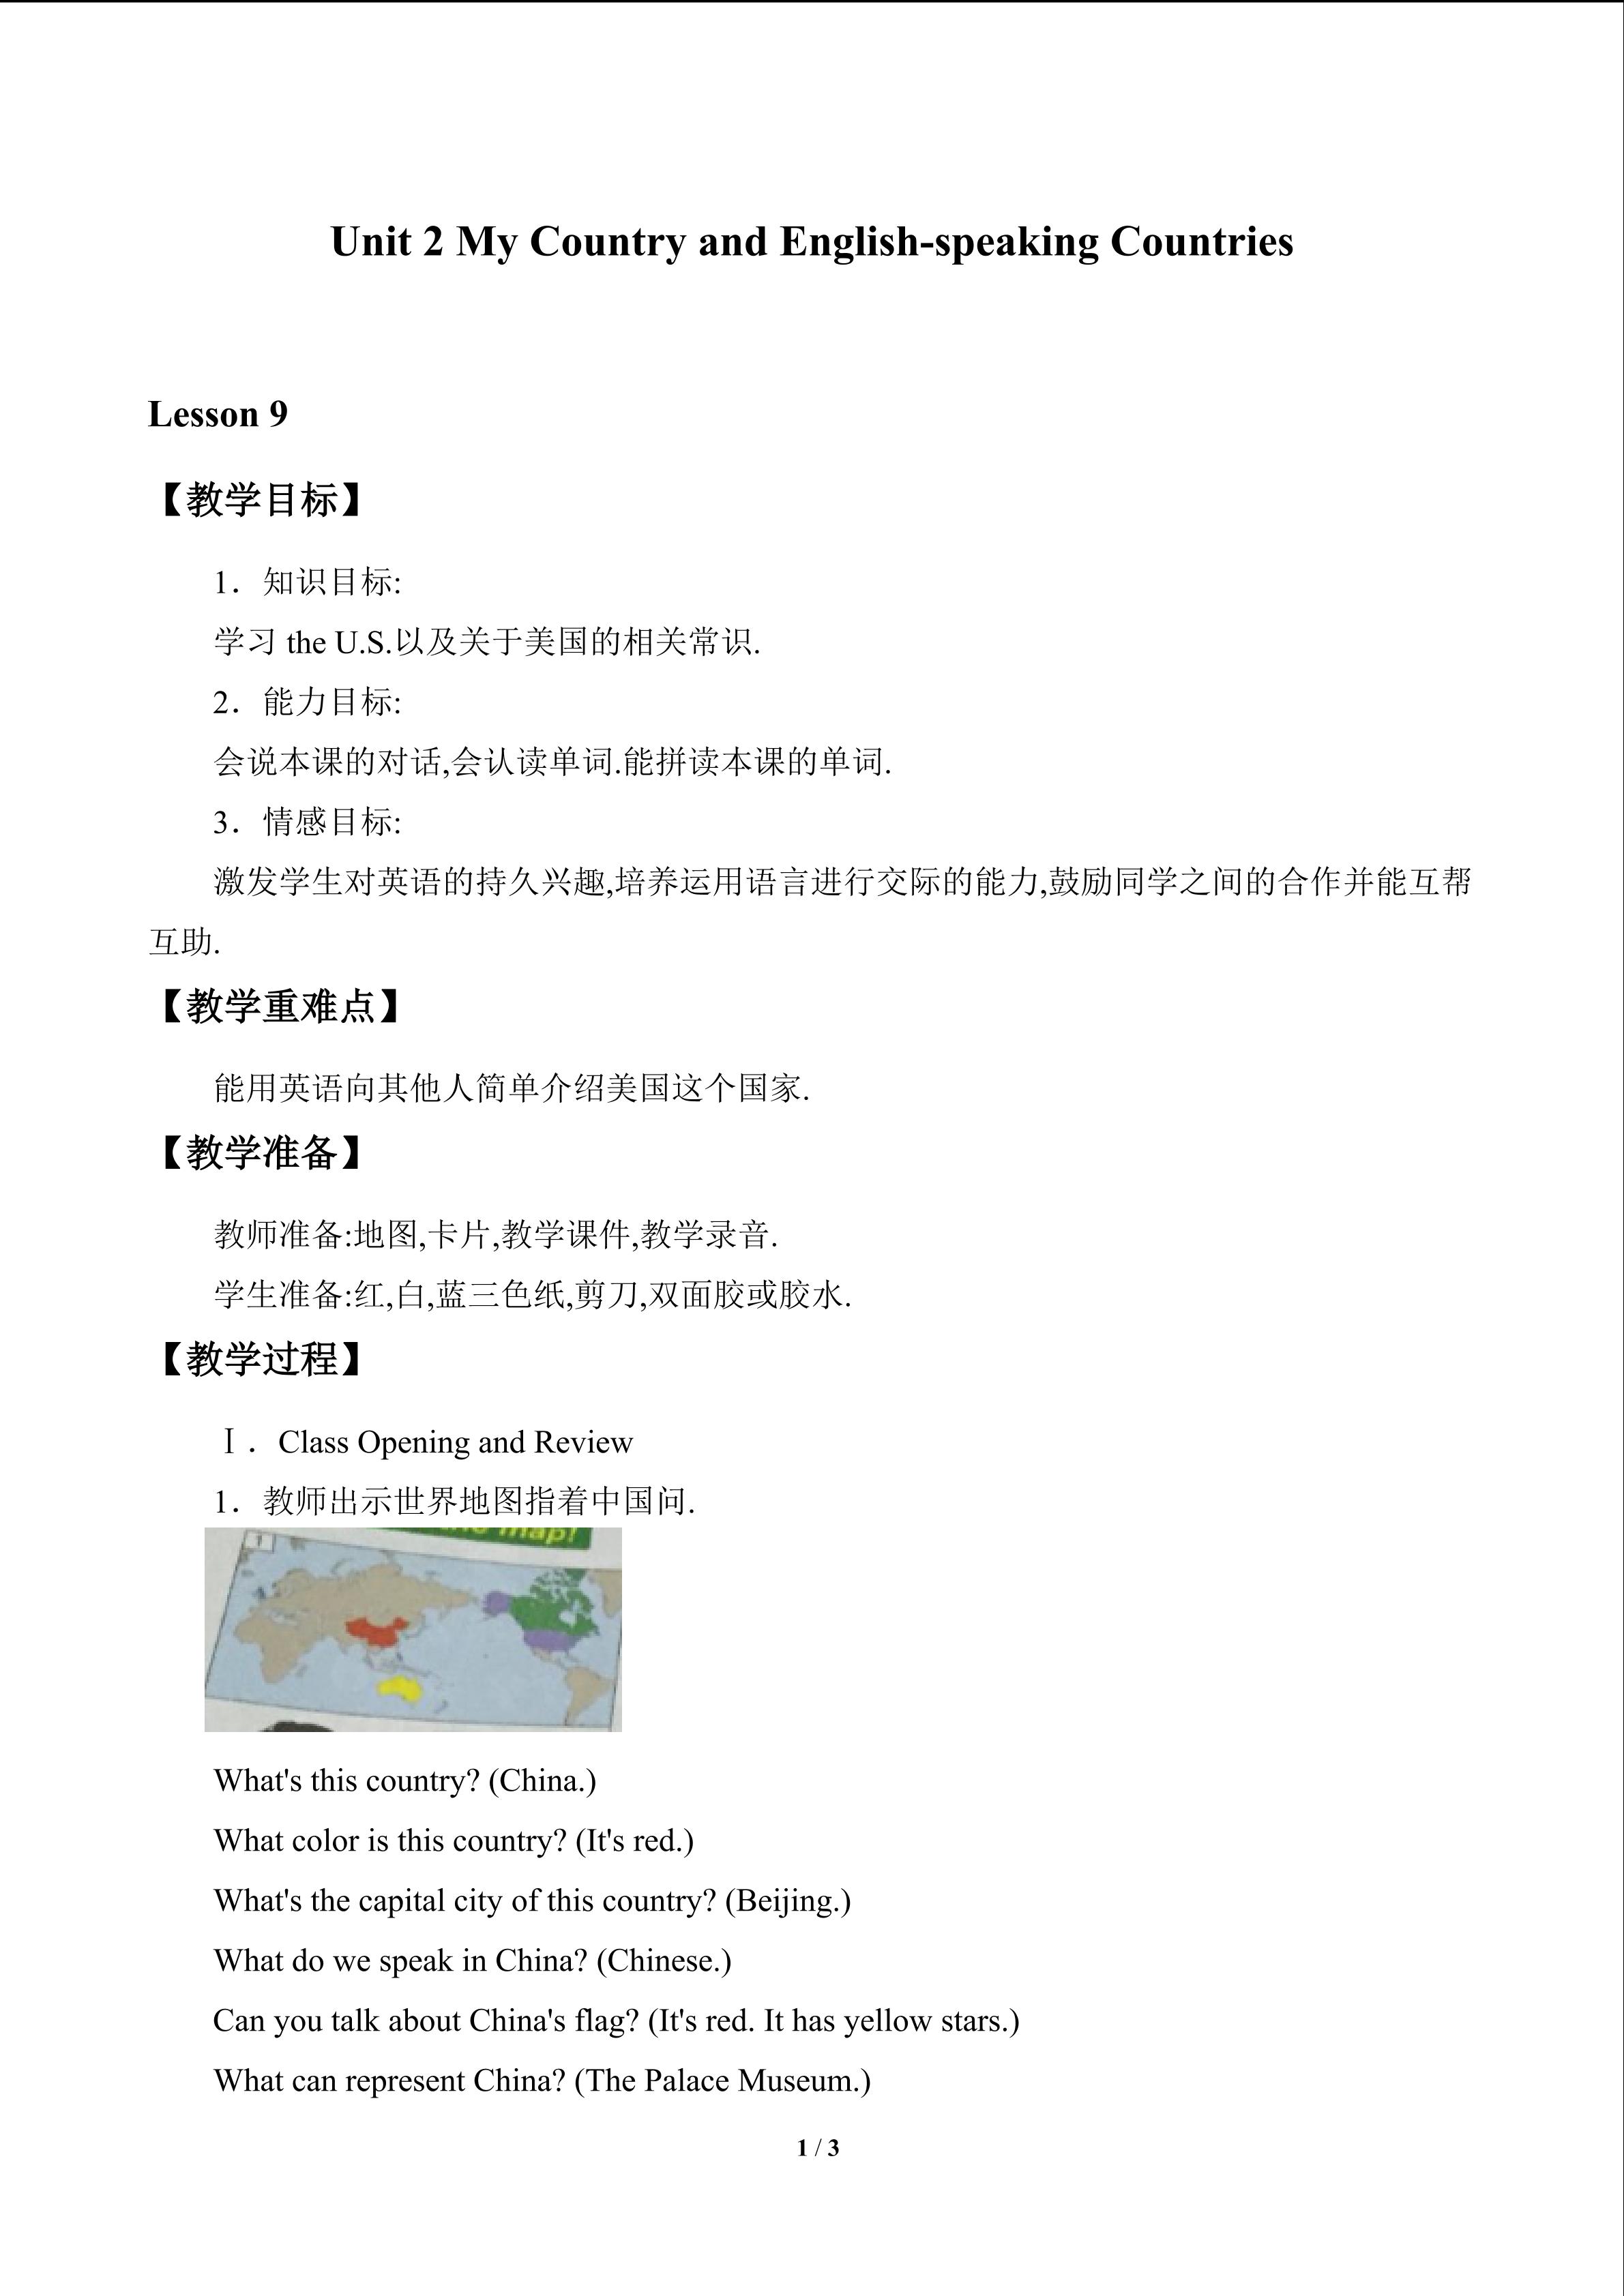 Unit 2 My Country and English-speaking Countries_教案3